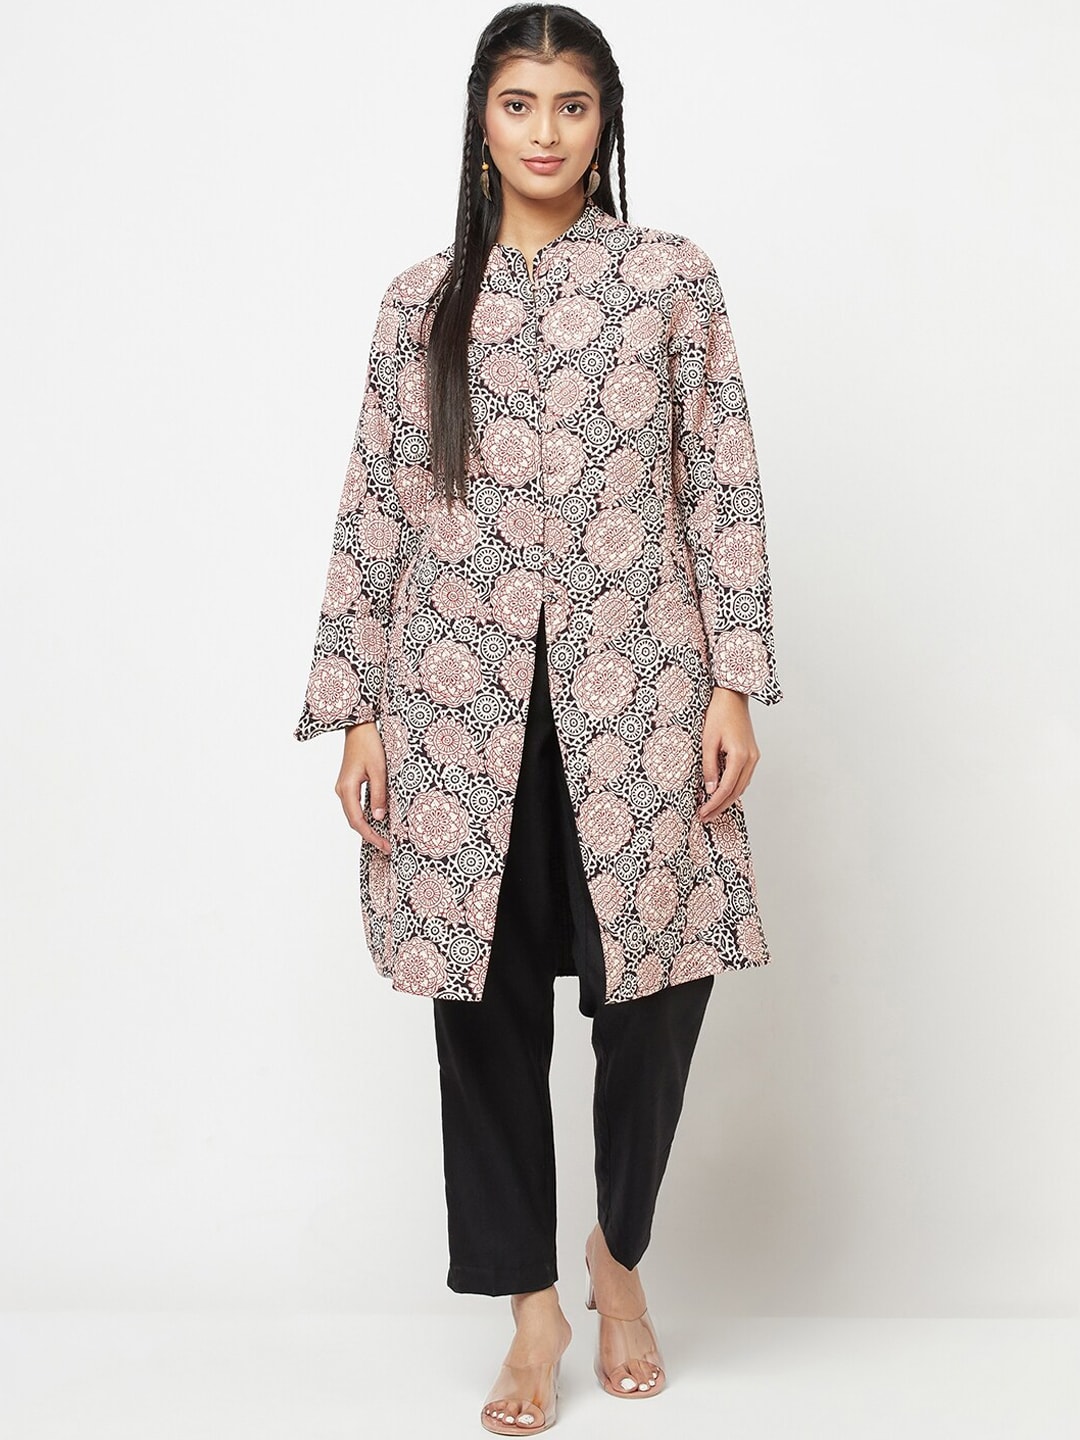 Fabindia Women Black & Beige Floral Longline Cotton Tailored Jacket Price in India